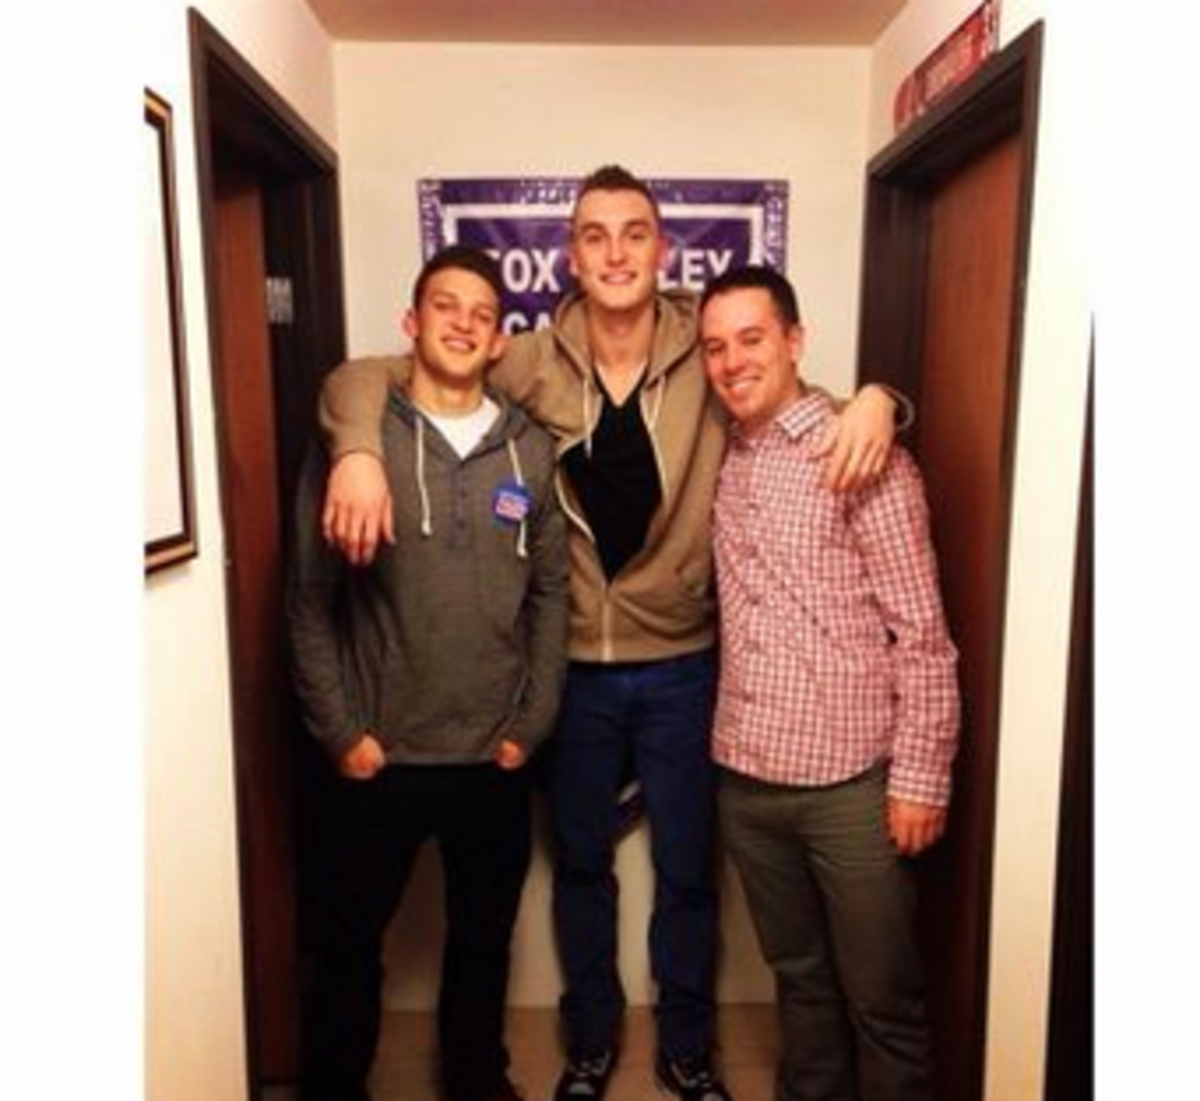 Sam Dekker poses for picture with friends.